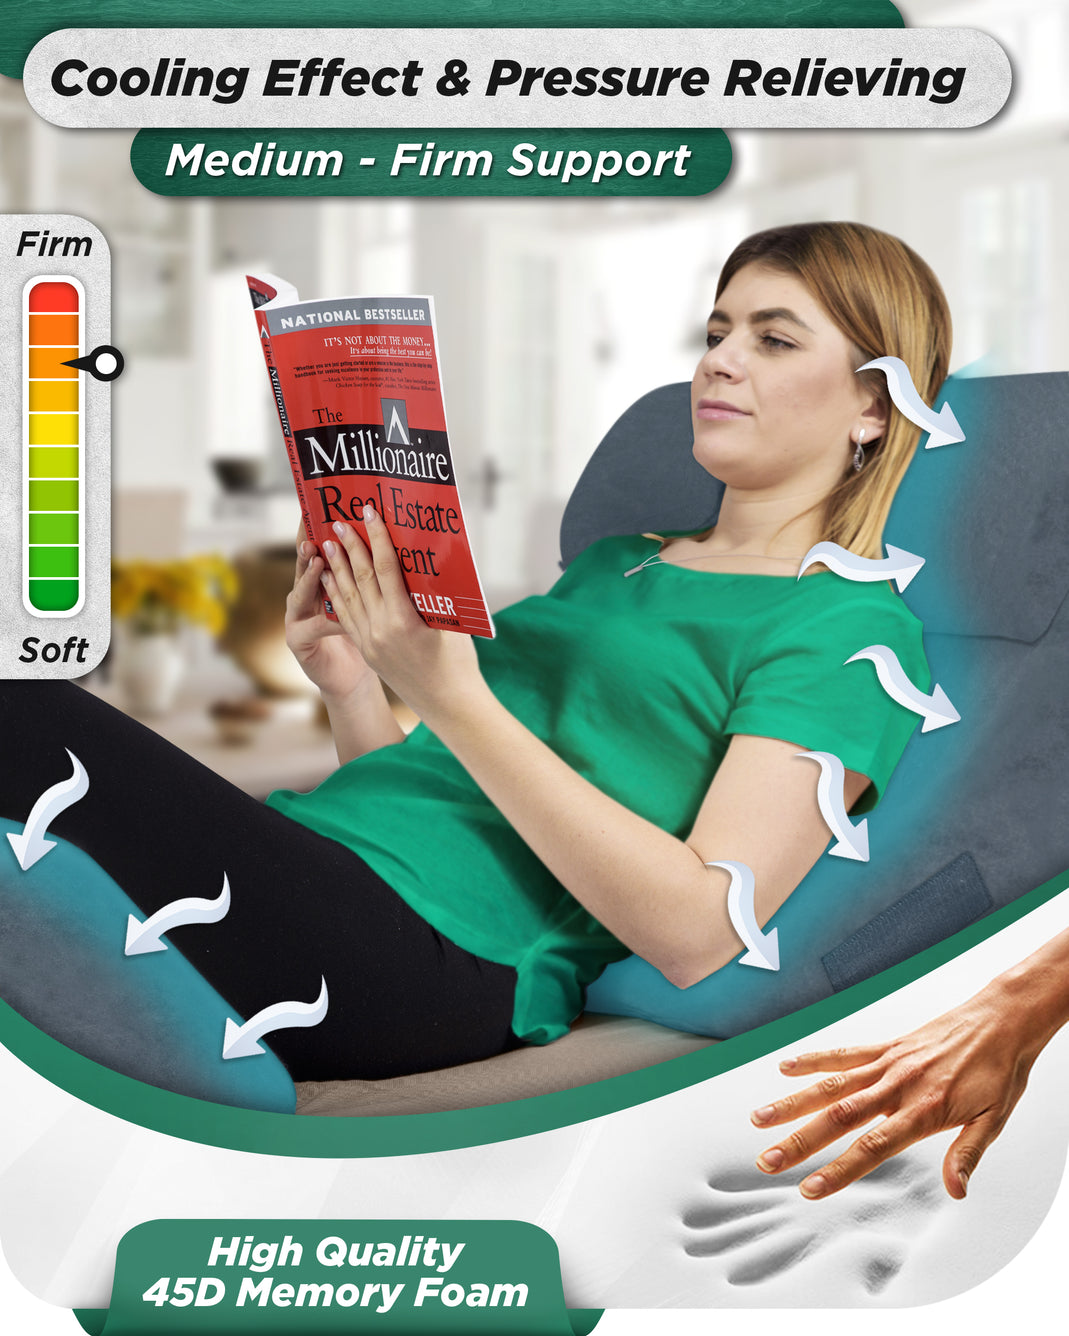 LX14 1pc Wedge Knee Pillow